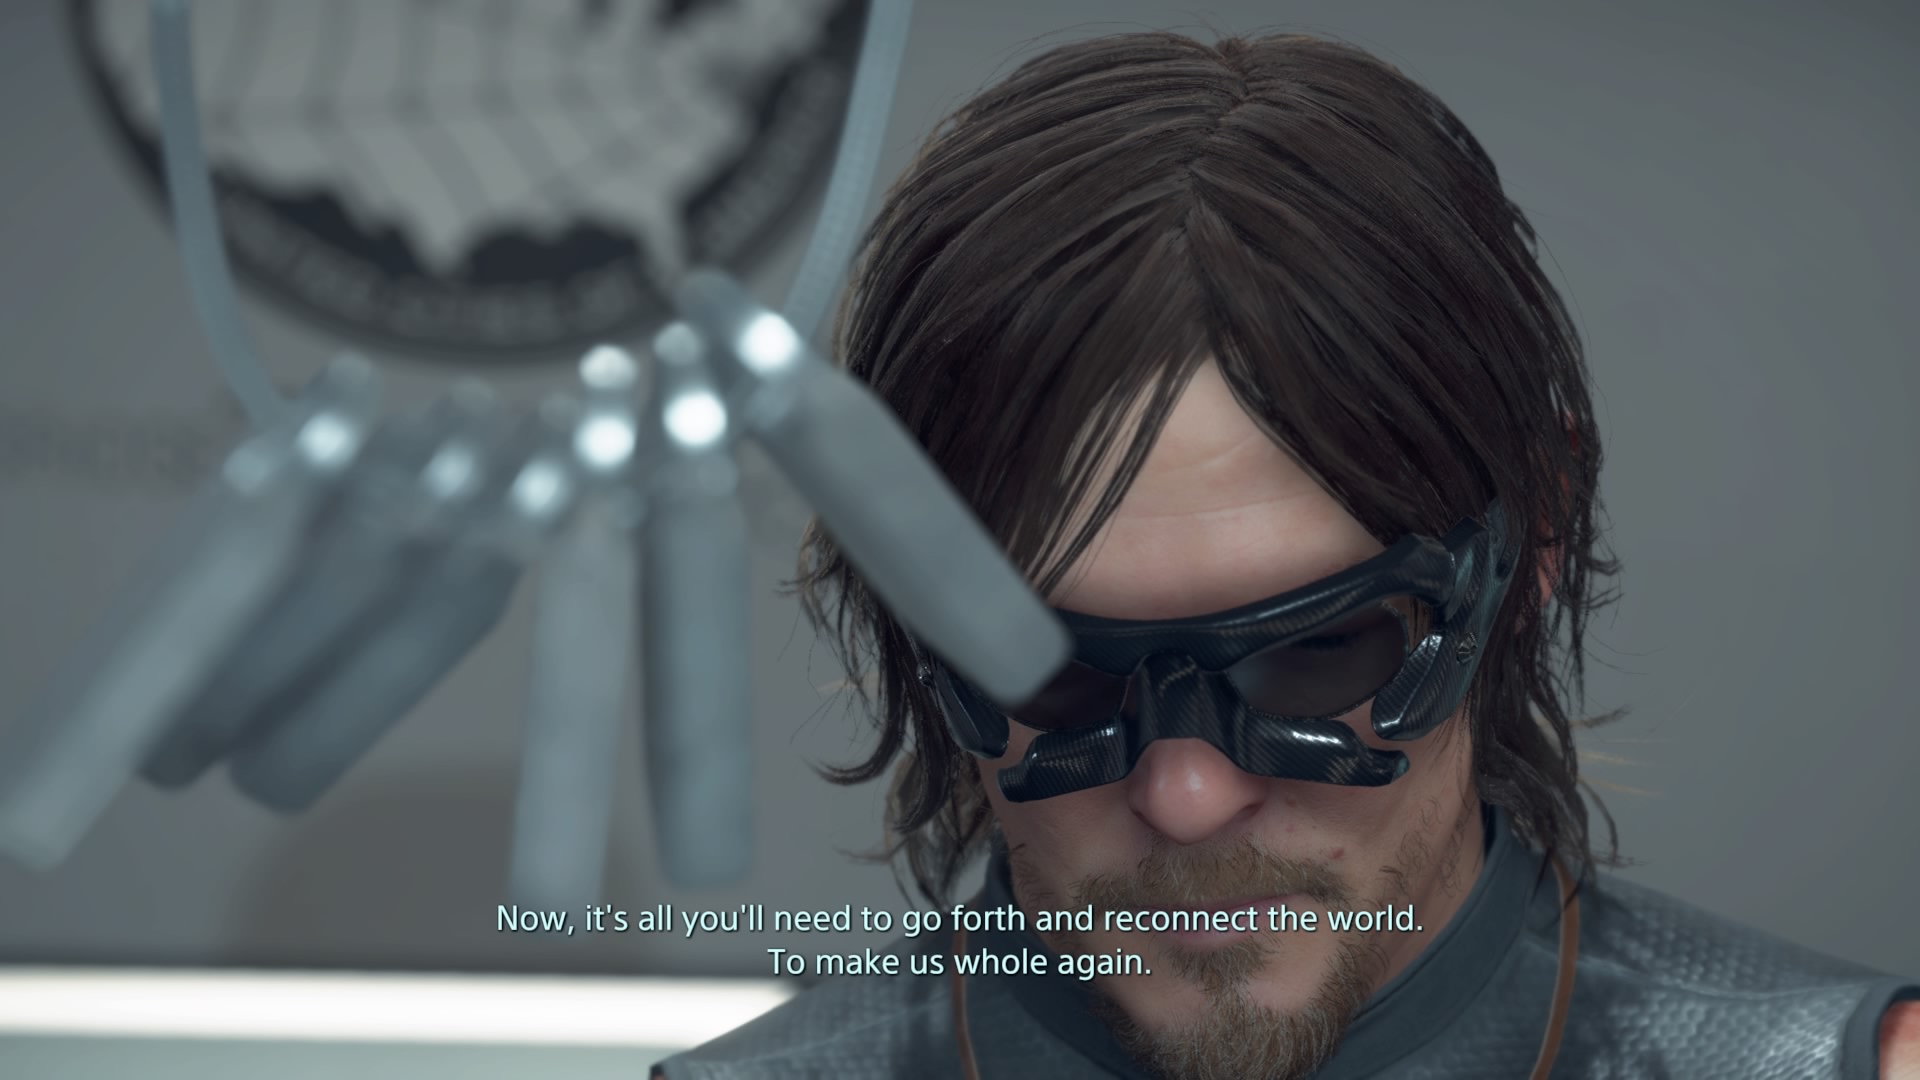 Death Stranding intends to make people think about the 'meaning of